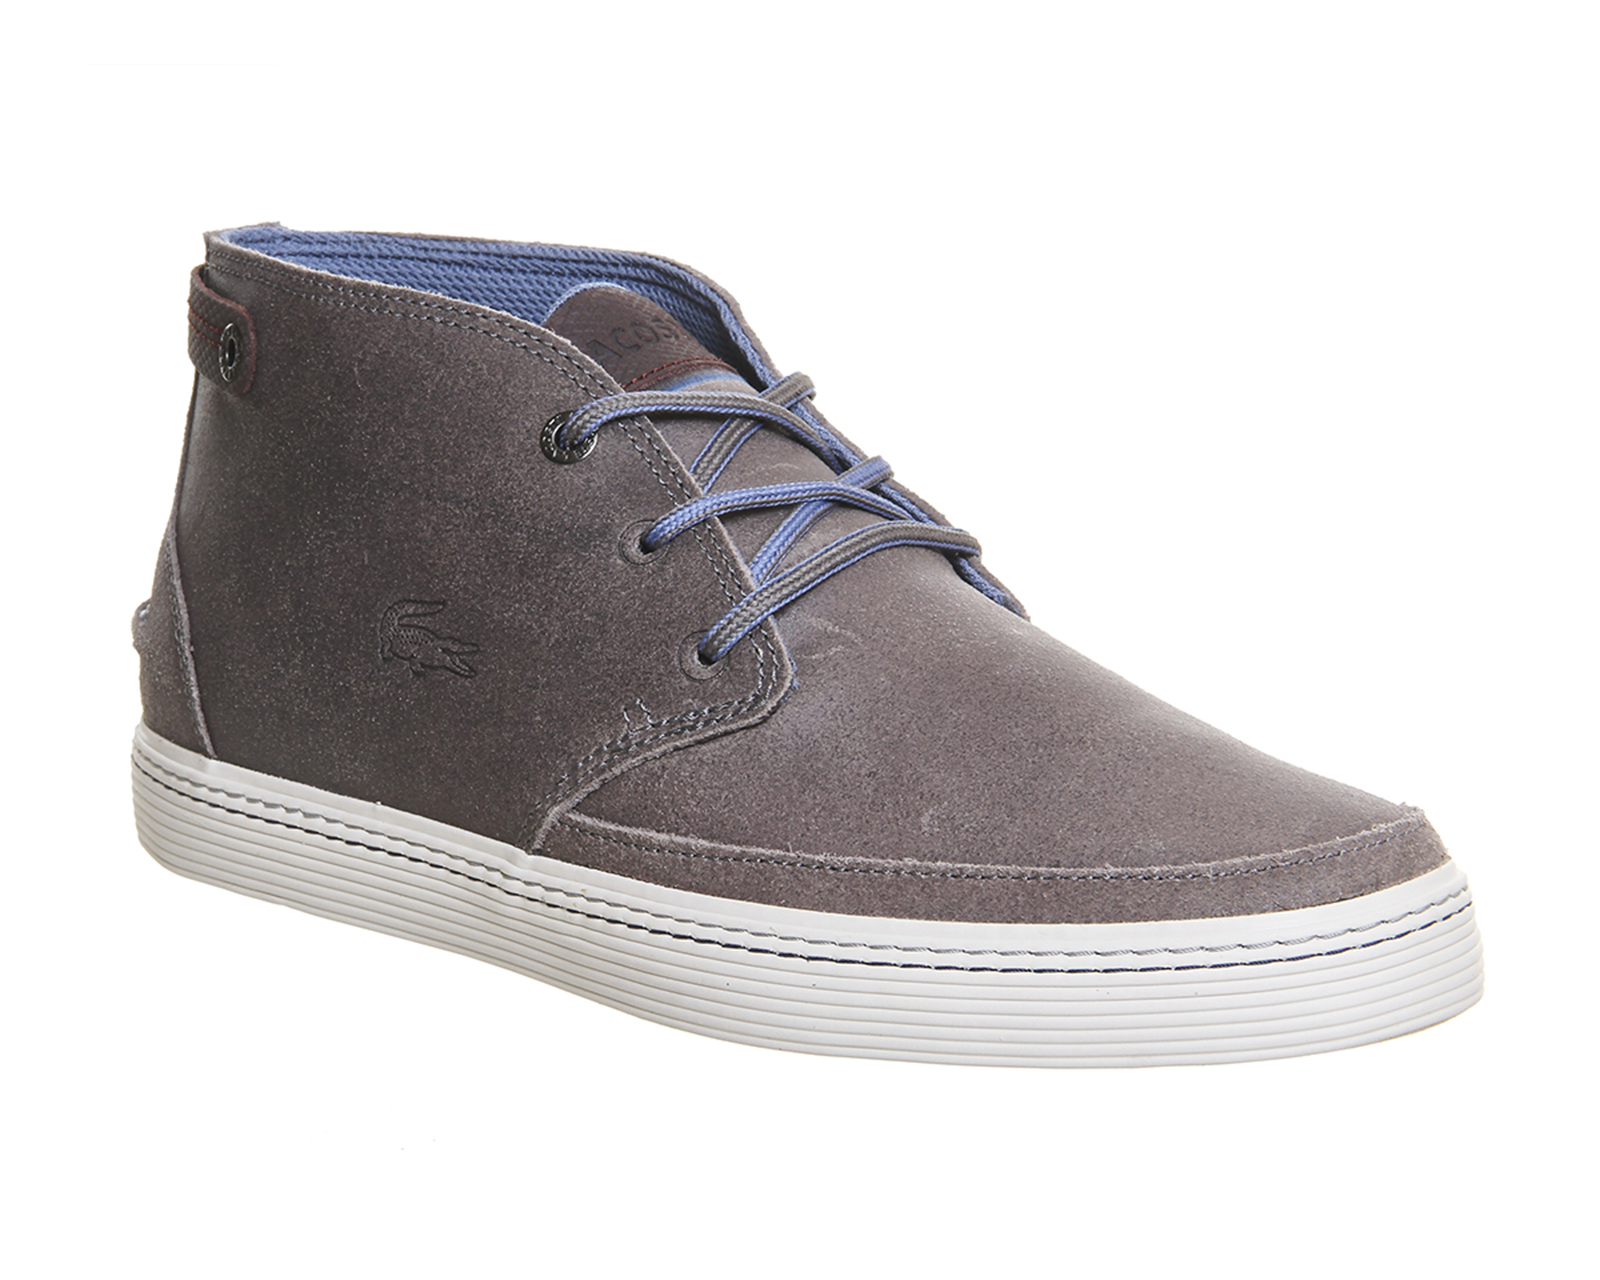 Lacoste Clavel Chukka Boots Grey Suede 